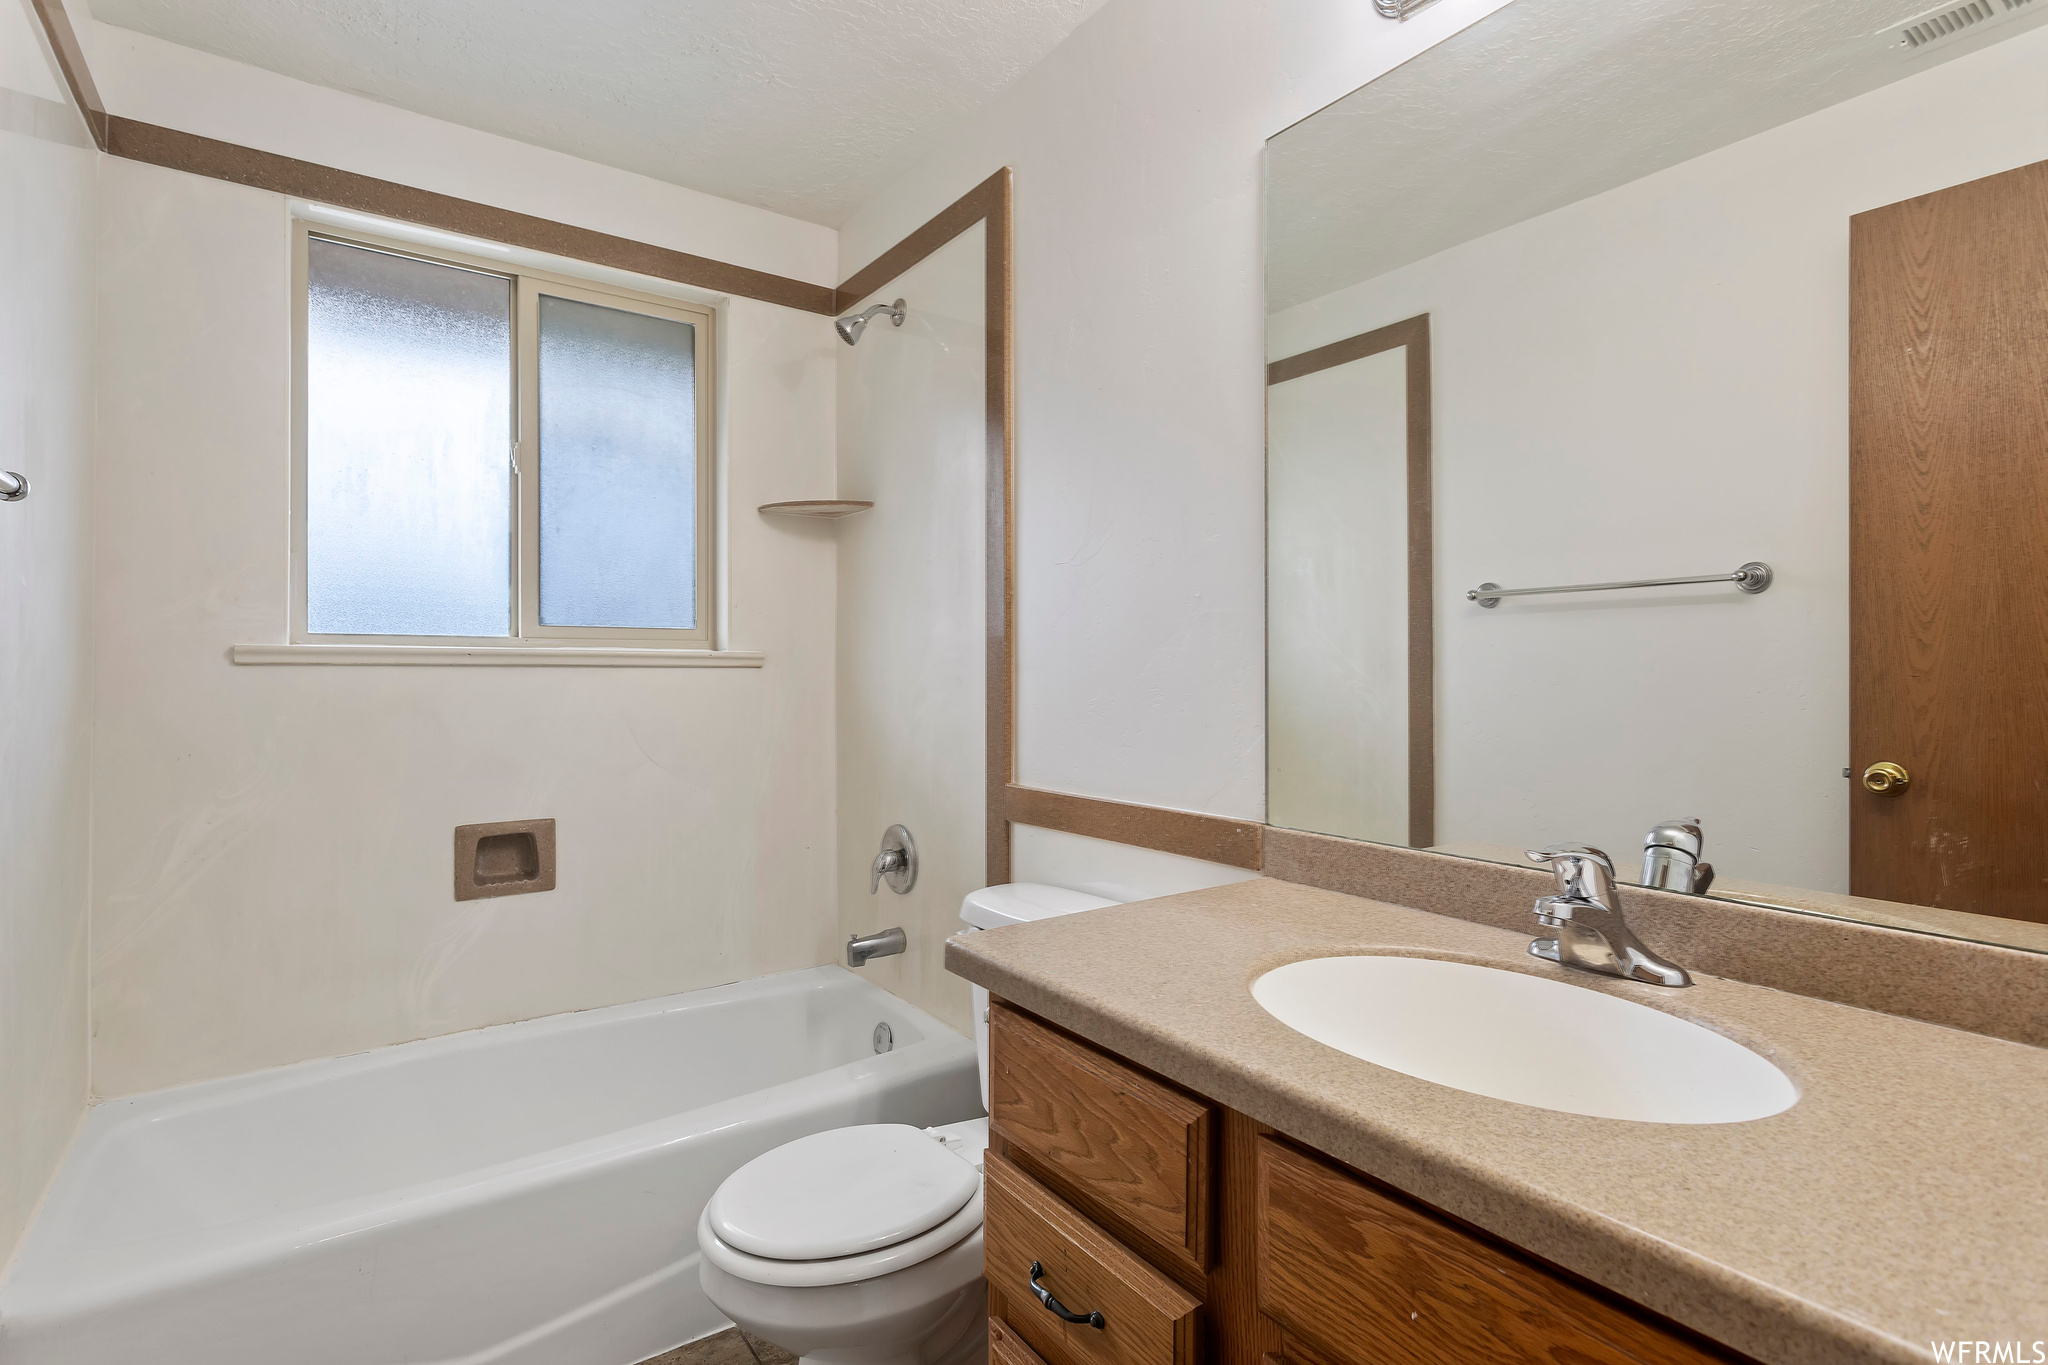 Full bathroom featuring tub / shower combination, oversized vanity, and toilet